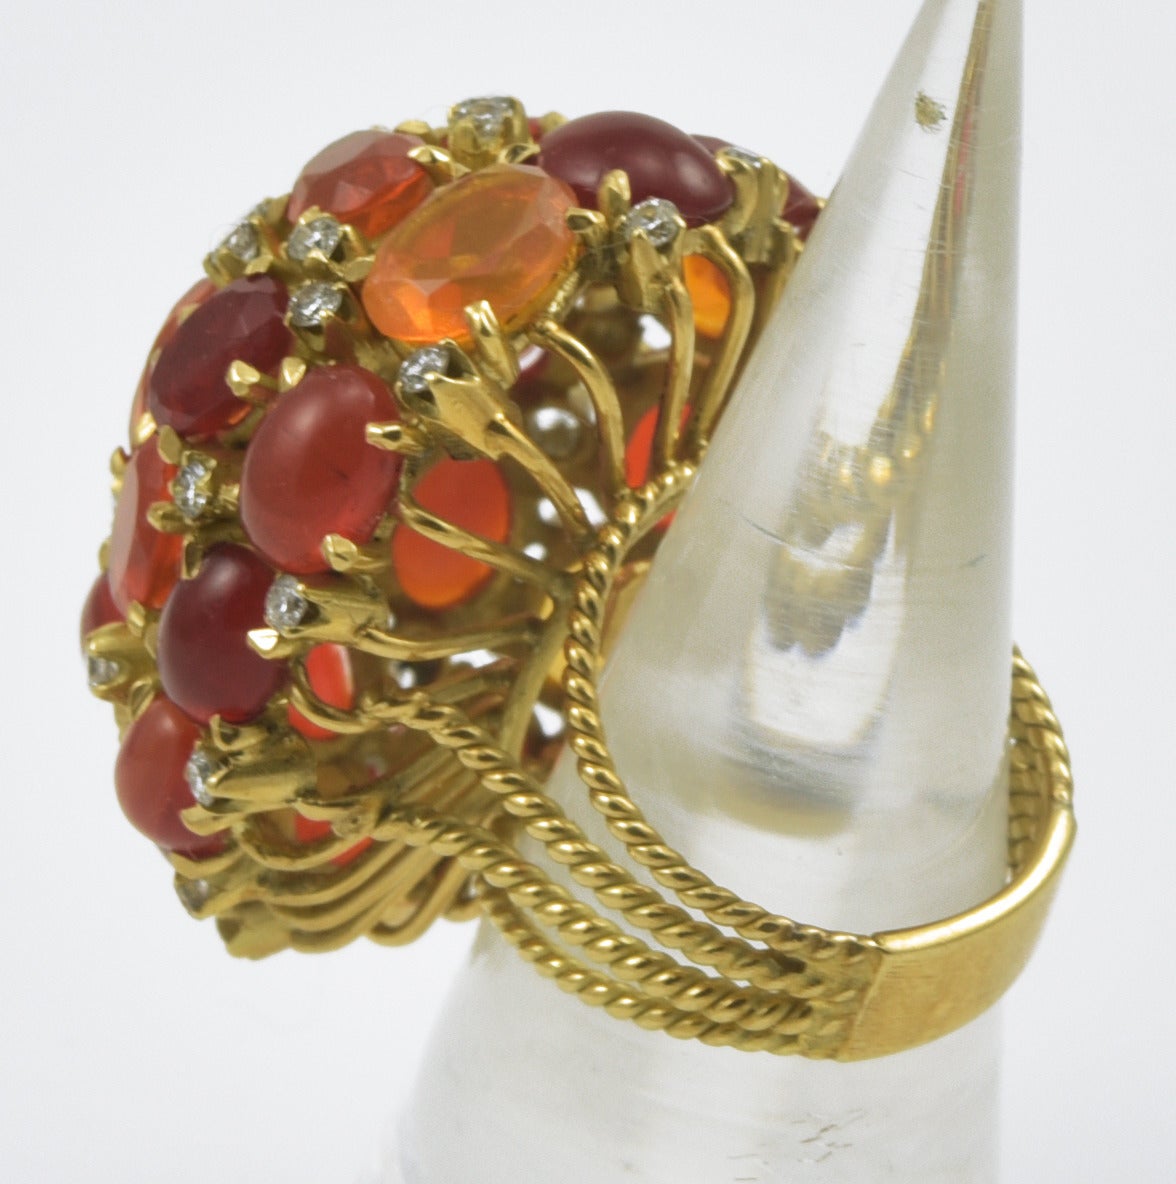 Magnificent 18K handmade fire opal and diamond cocktail ring. Signed Virginia Witbeck, circa 1990s.